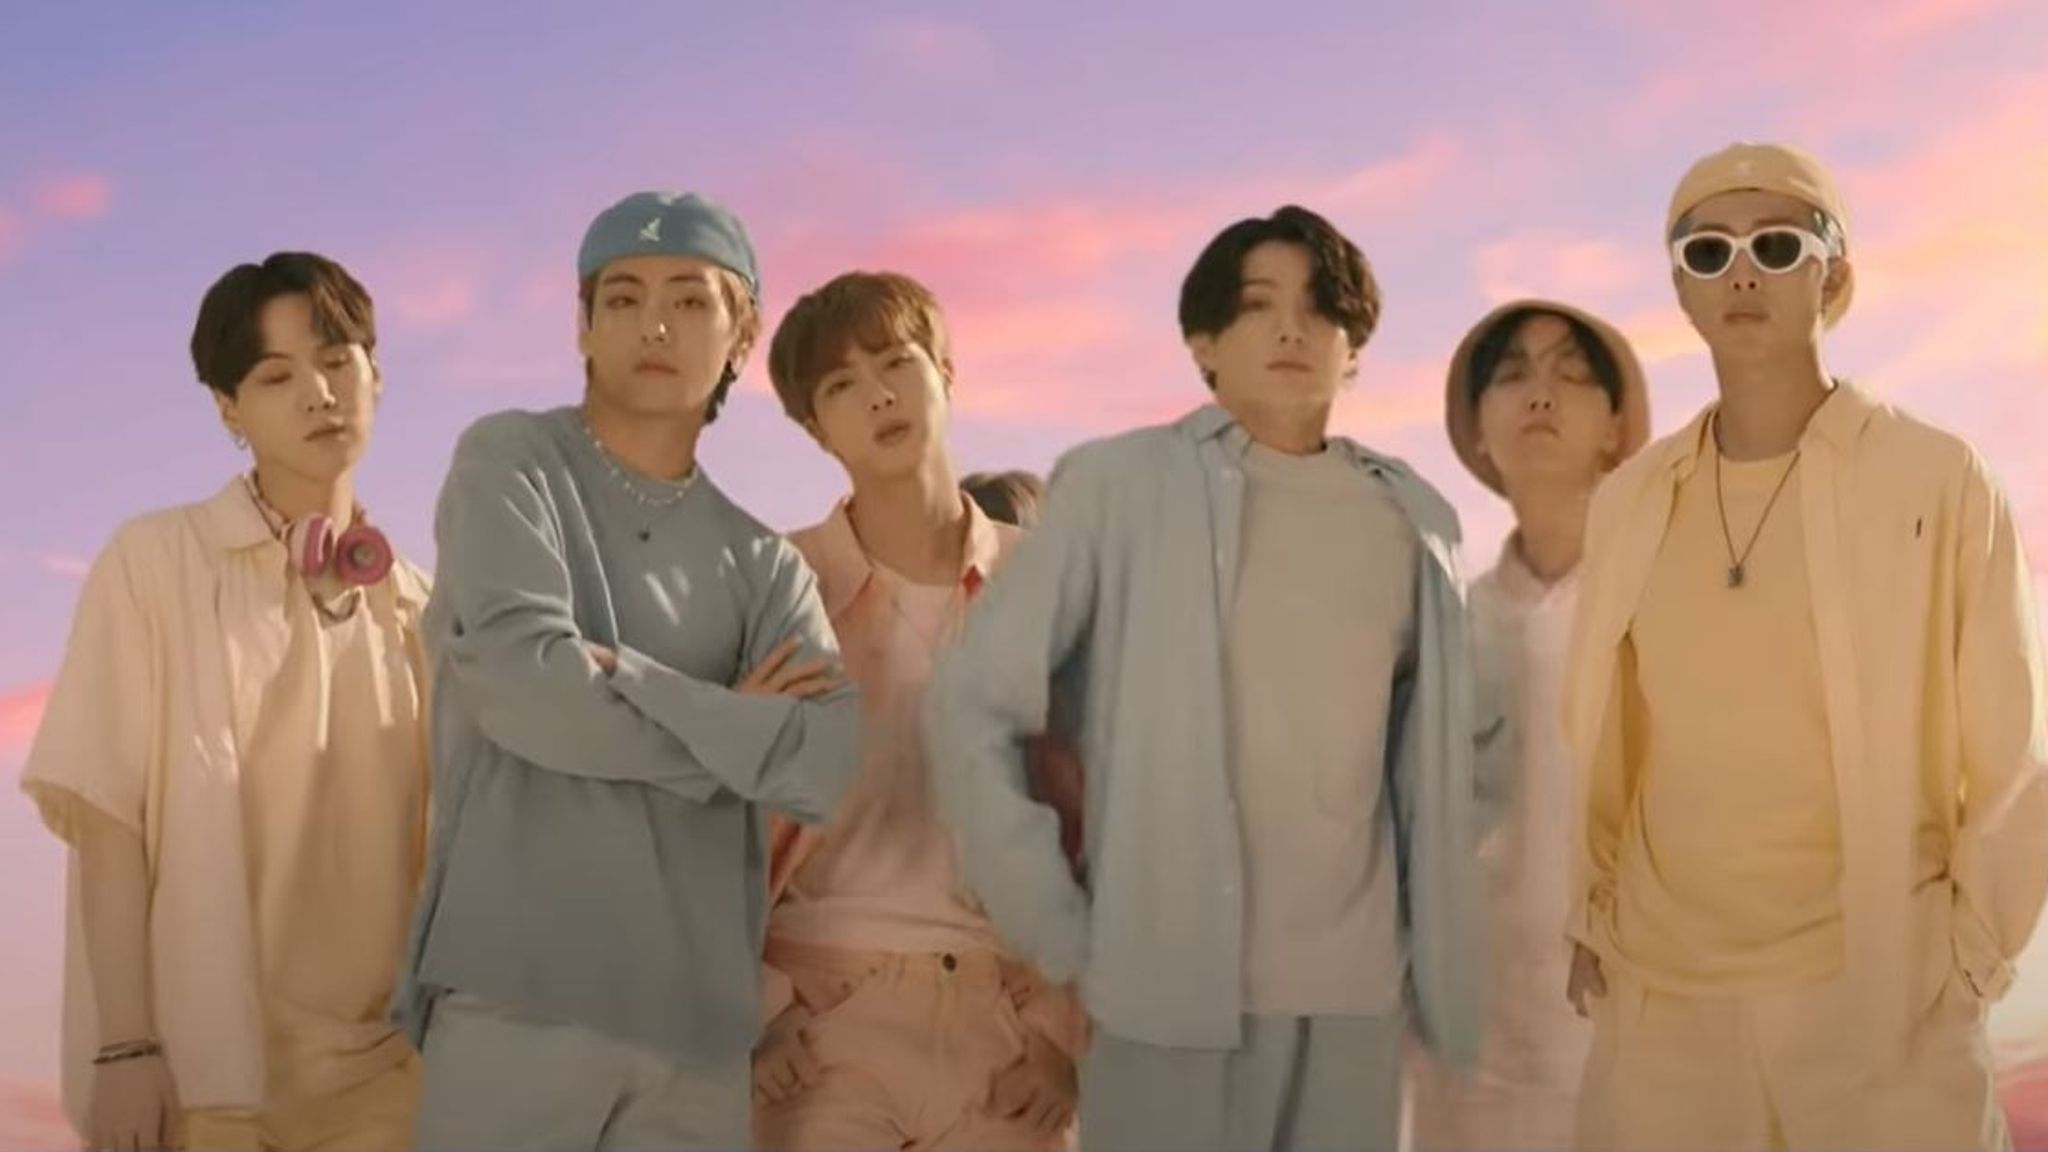 Bts Song Dynamite Smashes Youtube Record With More Than 100 Million Views In 24 Hours Ents Arts News Sky News